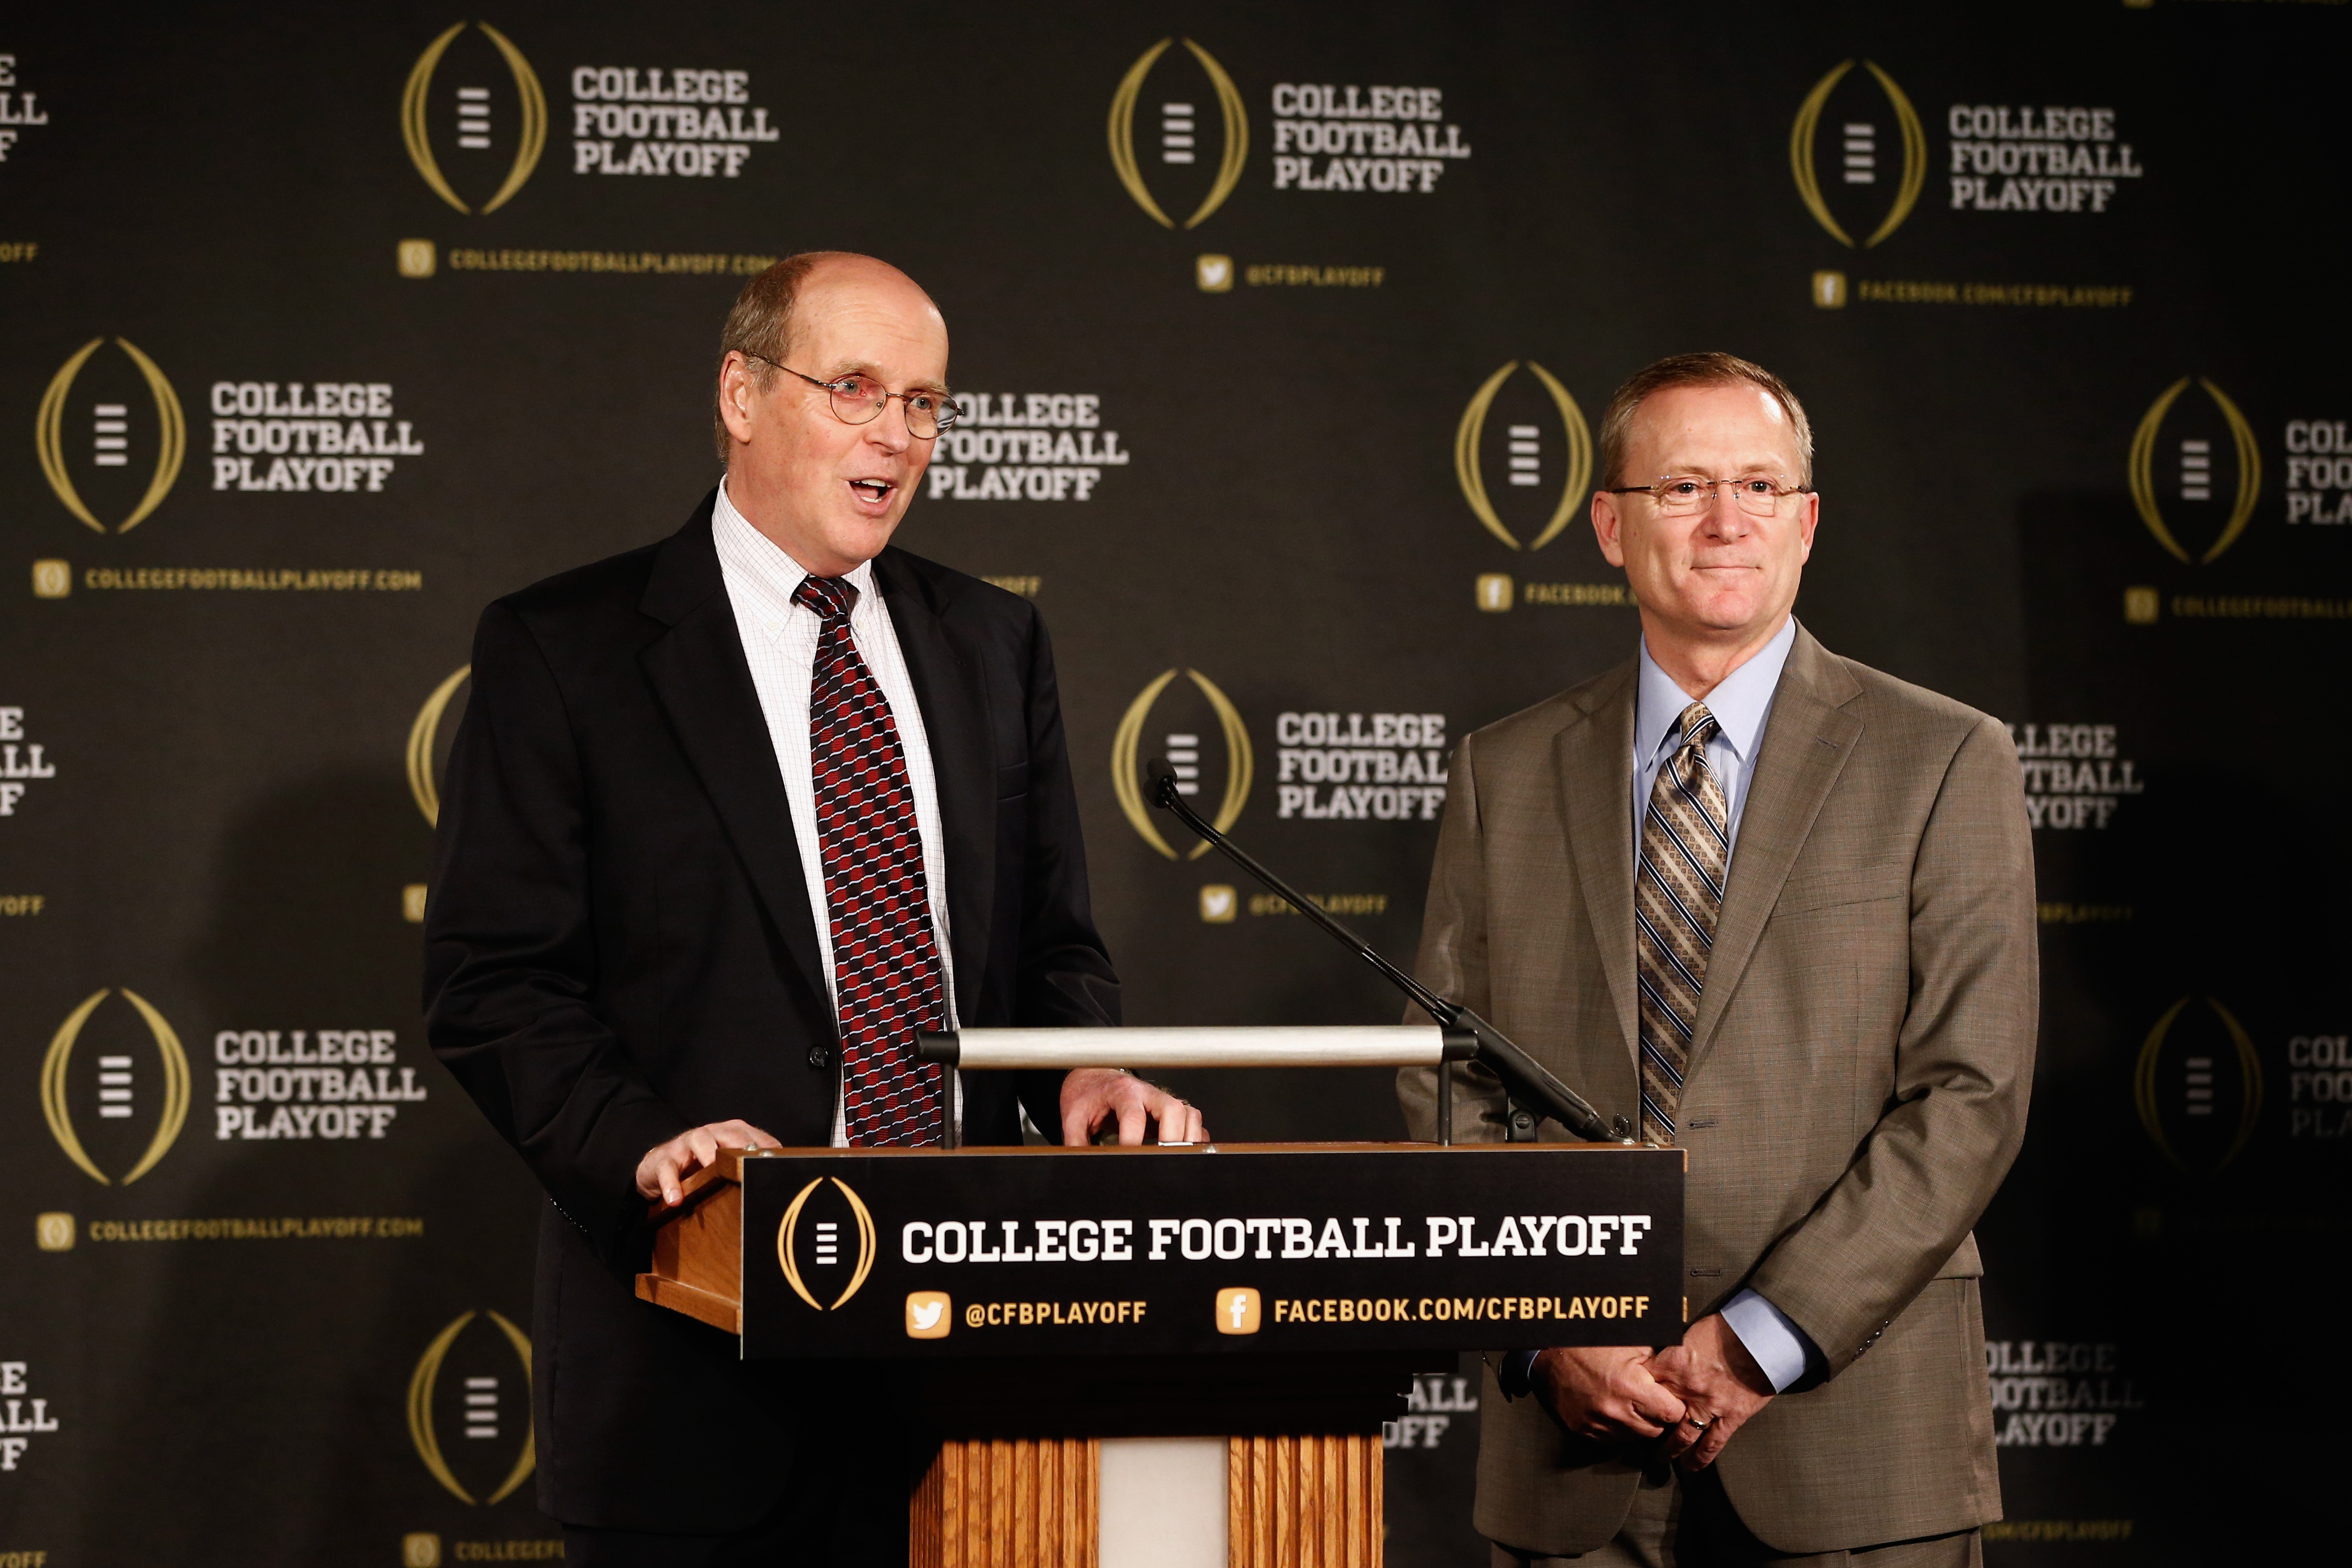 From left: Bill Hancock, executive director of the College Football Playoff, introduces Jeff Long as the chairman of the selection committee. Long will serve as the chairman of the 13 member committee that will select four teams to compete in the first playoff at the end of the 2014 season.  (Getty)